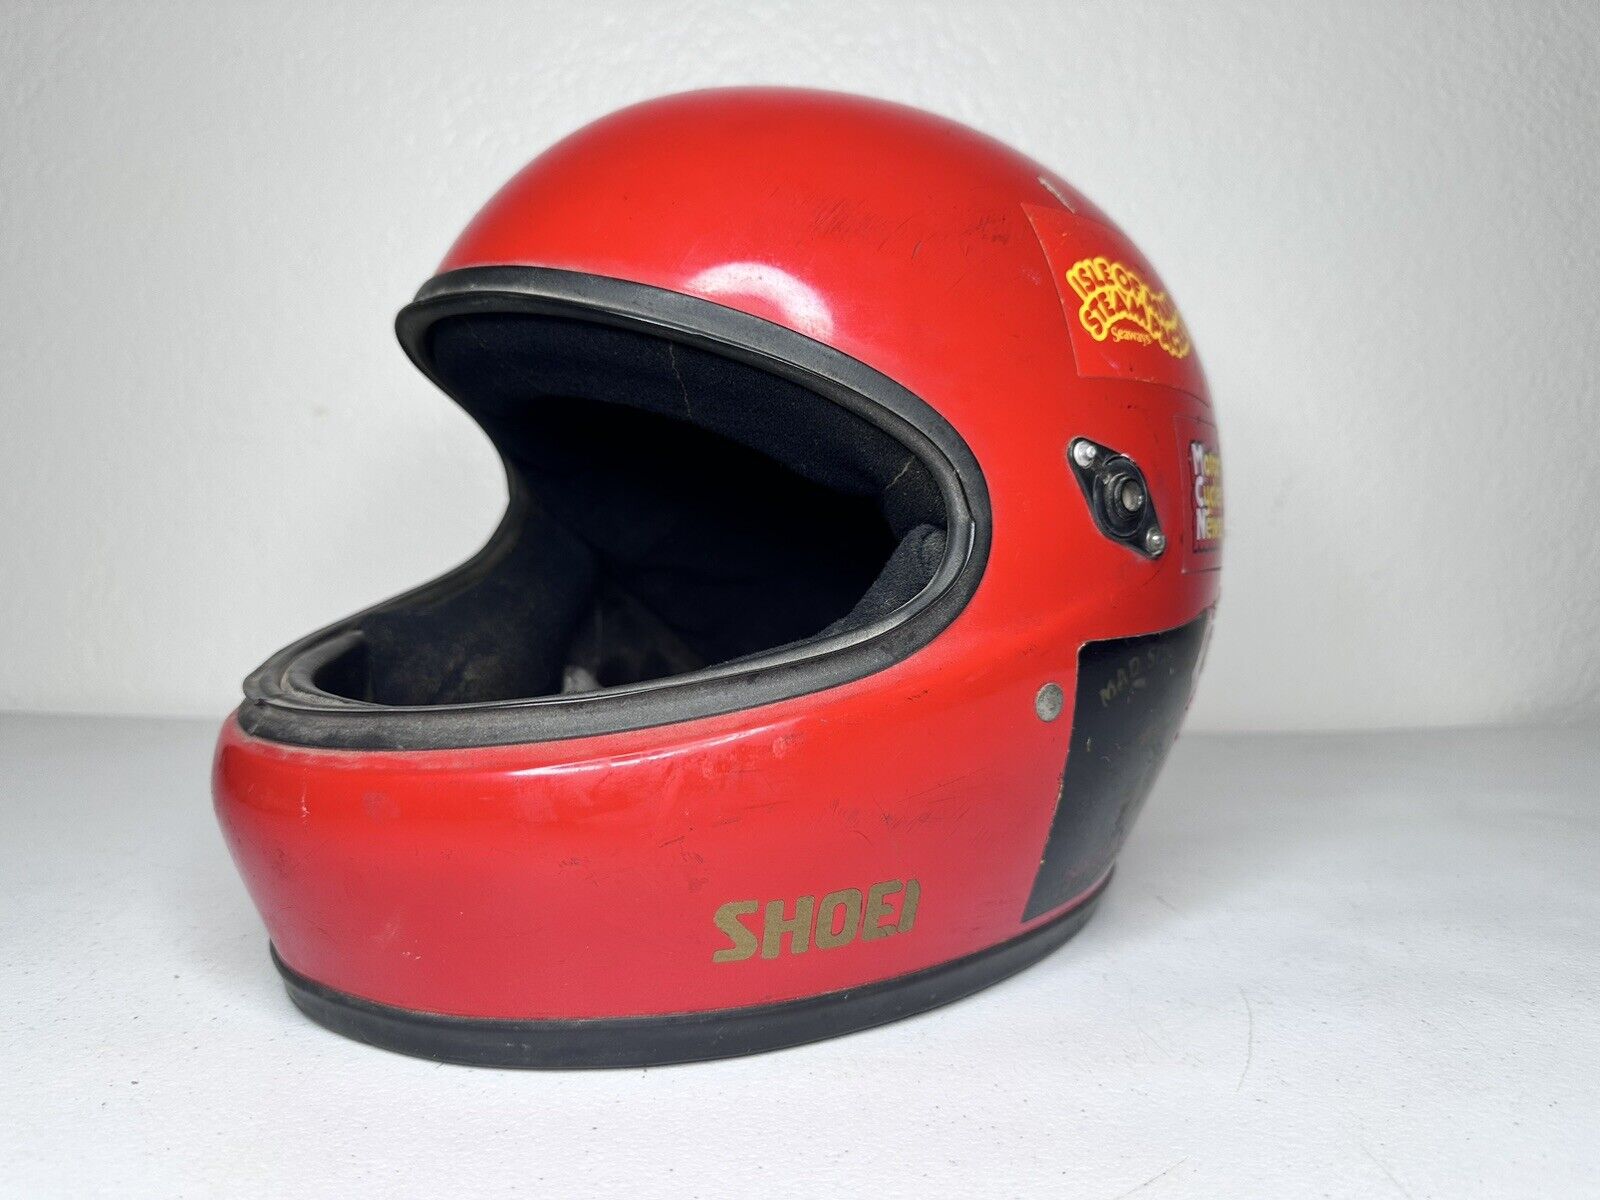 Vintage 1980s Shoei Racing Motorcycle Helmet - Red, Stickered Collectible (Size 7 1/8 - 7 1/4) - TreasuTiques